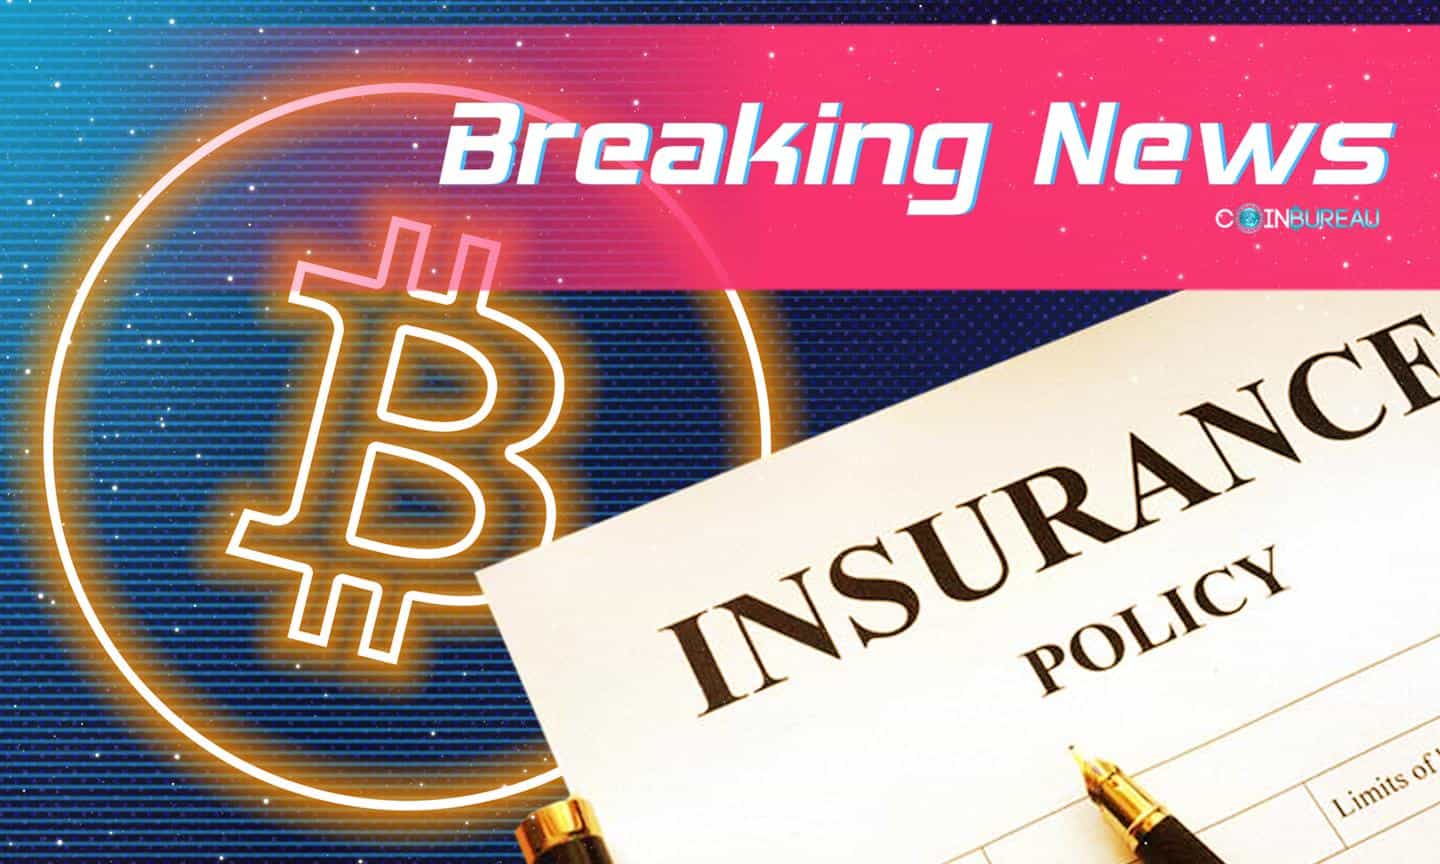 Billionaire Investor Says Bitcoin is an Insurance Policy